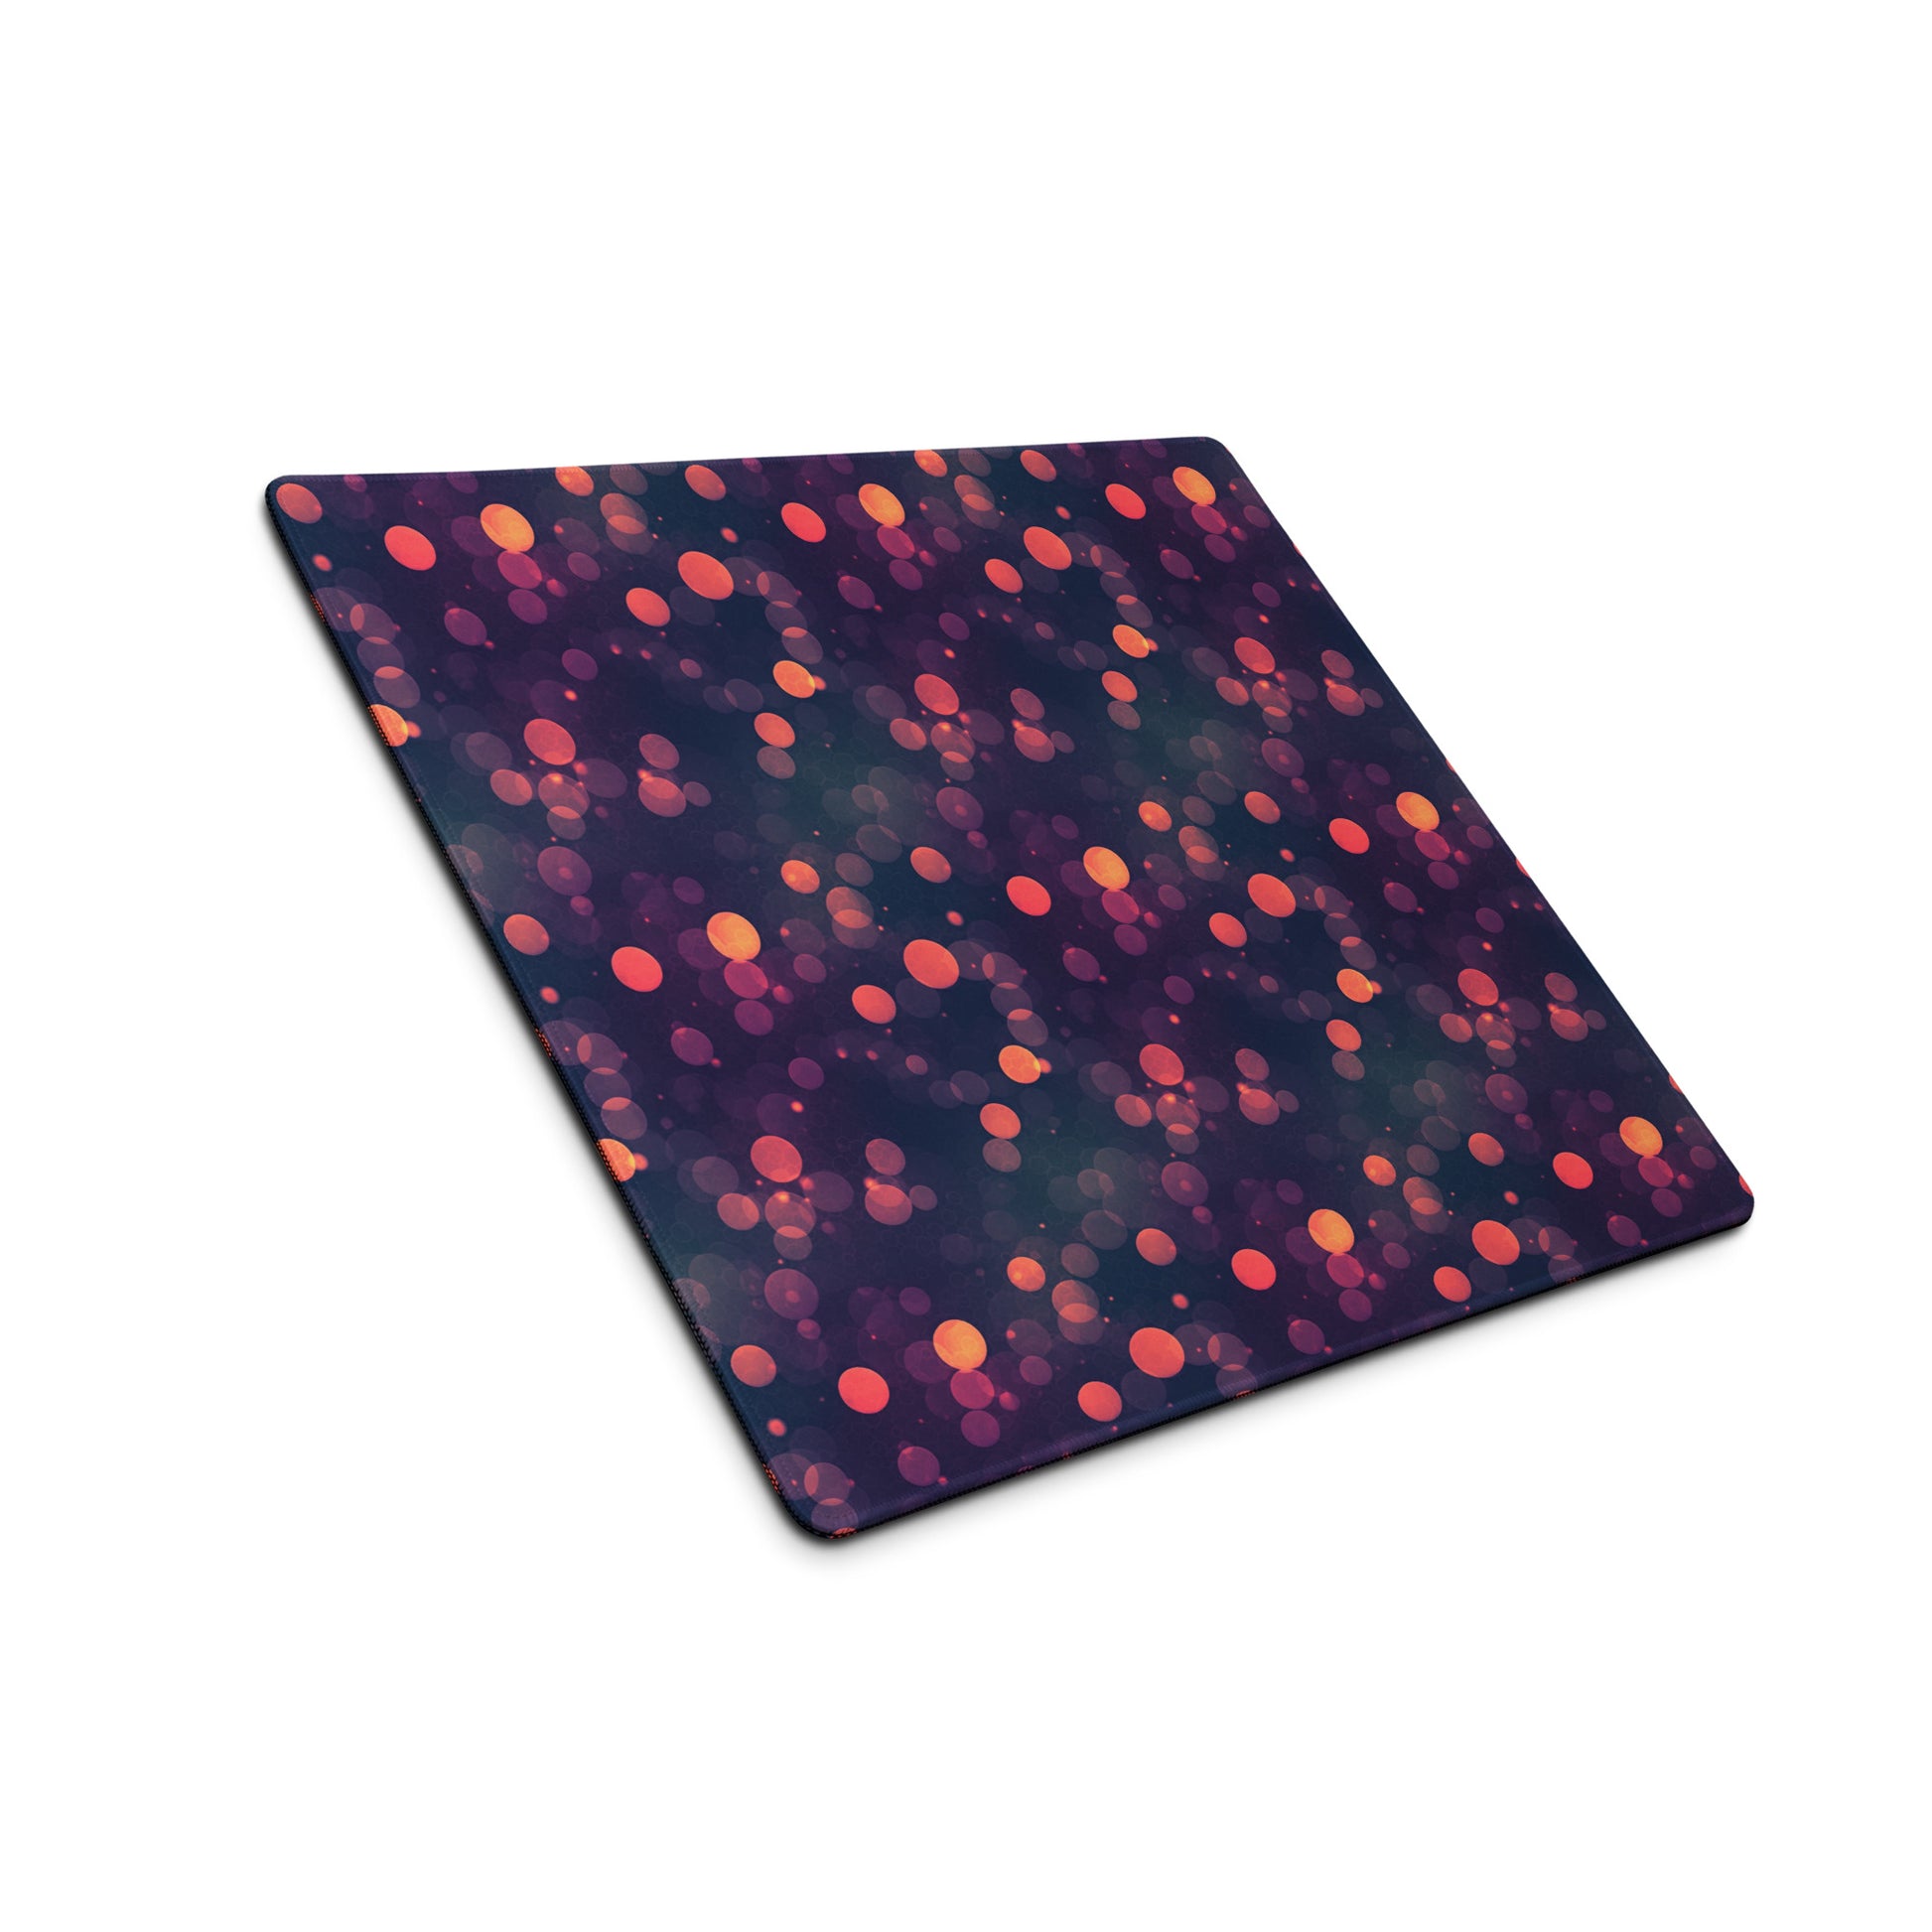 A 18" x 16" desk pad with a purple and red polka dot pattern sitting at an angle.